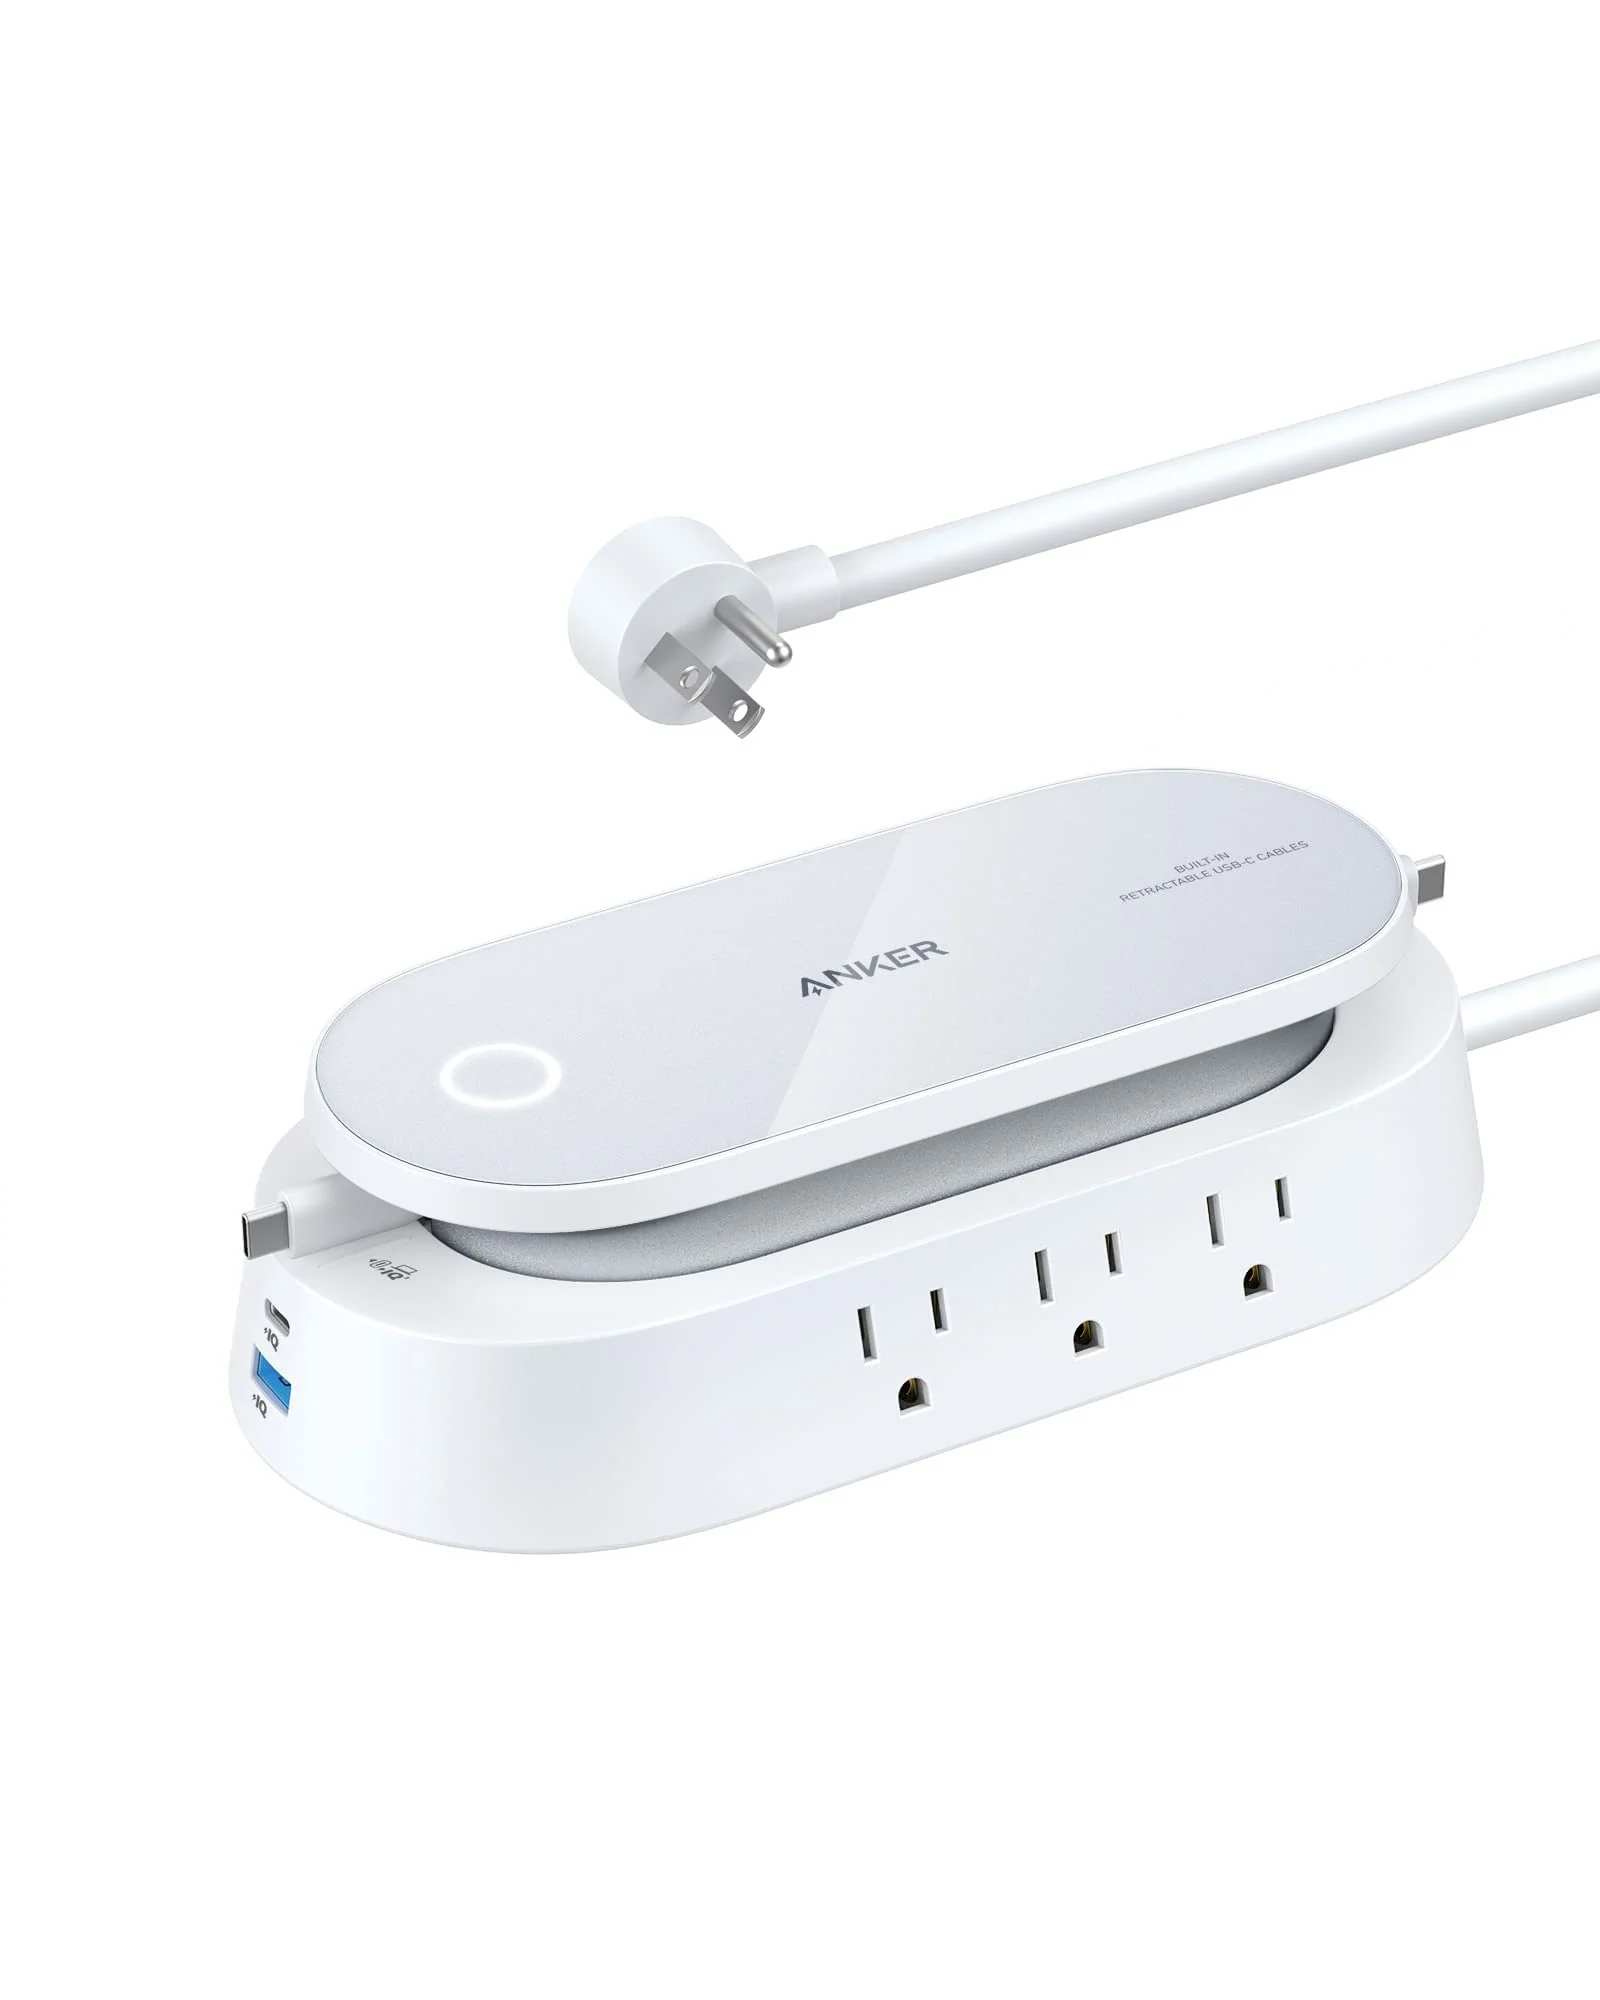 30% OFF Anker 647 Charging Station 10 in 1 Power Anker Store coupon code